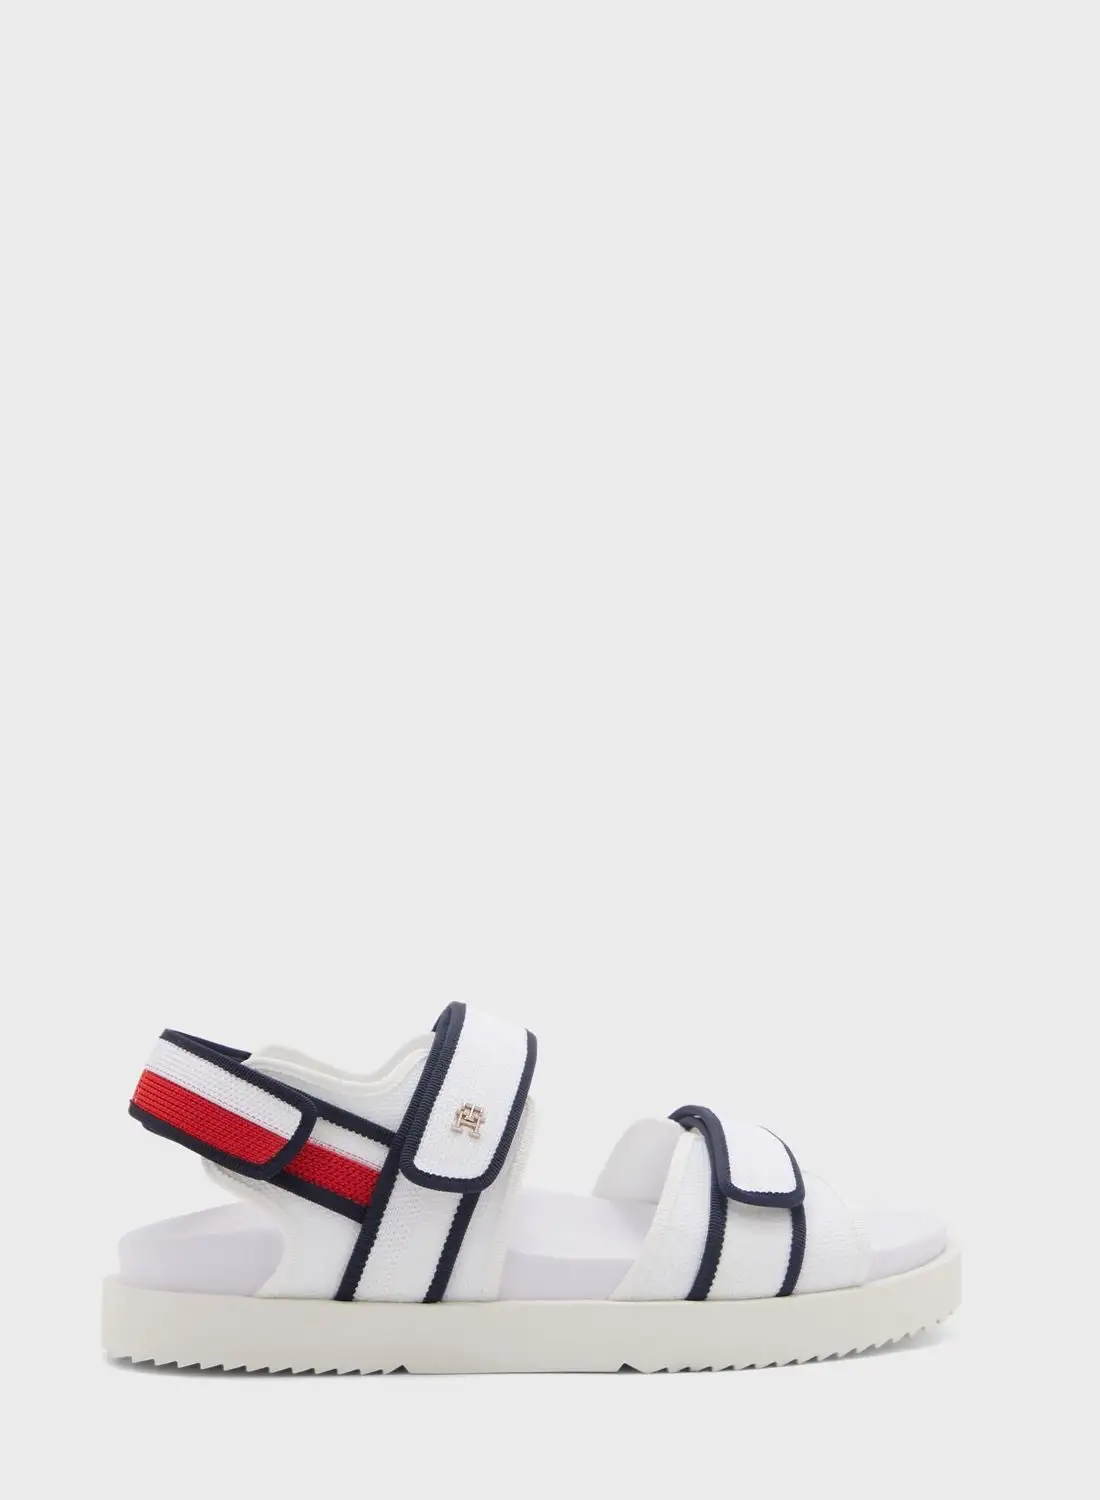 TOMMY HILFIGER Corporate Sporty Sandals